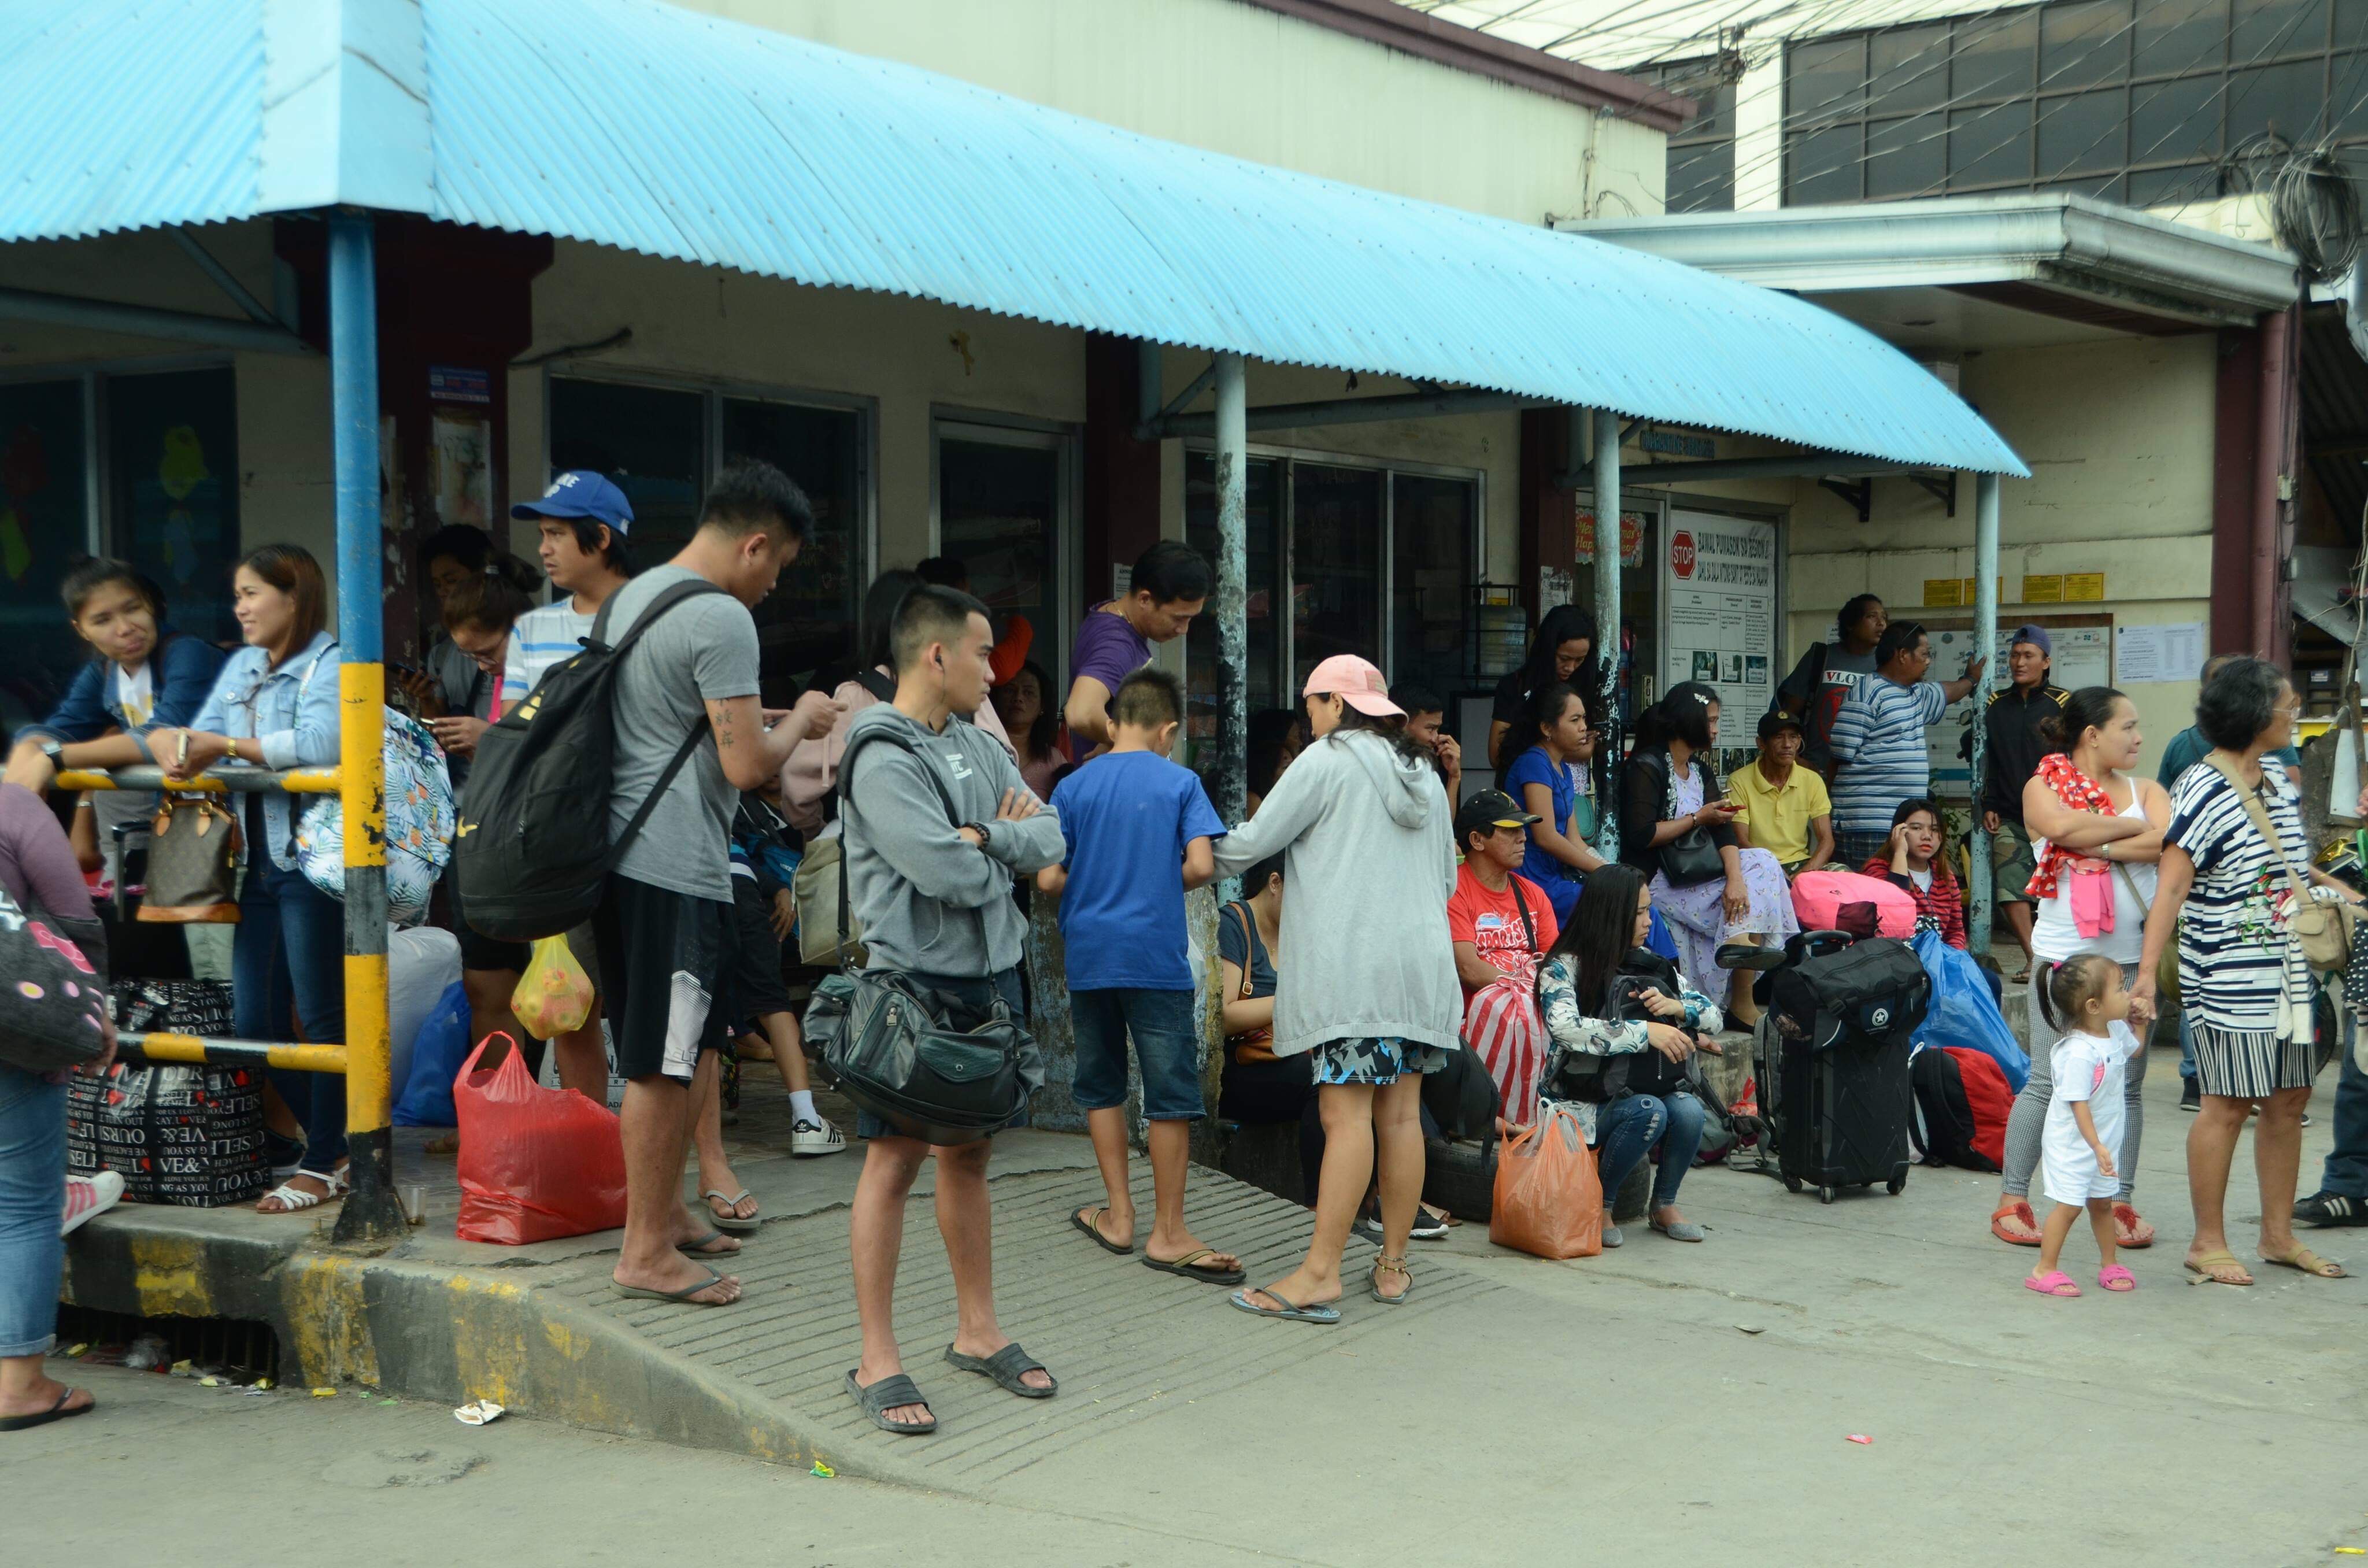 Over 3,600 individuals remain stranded in ports due to LPA